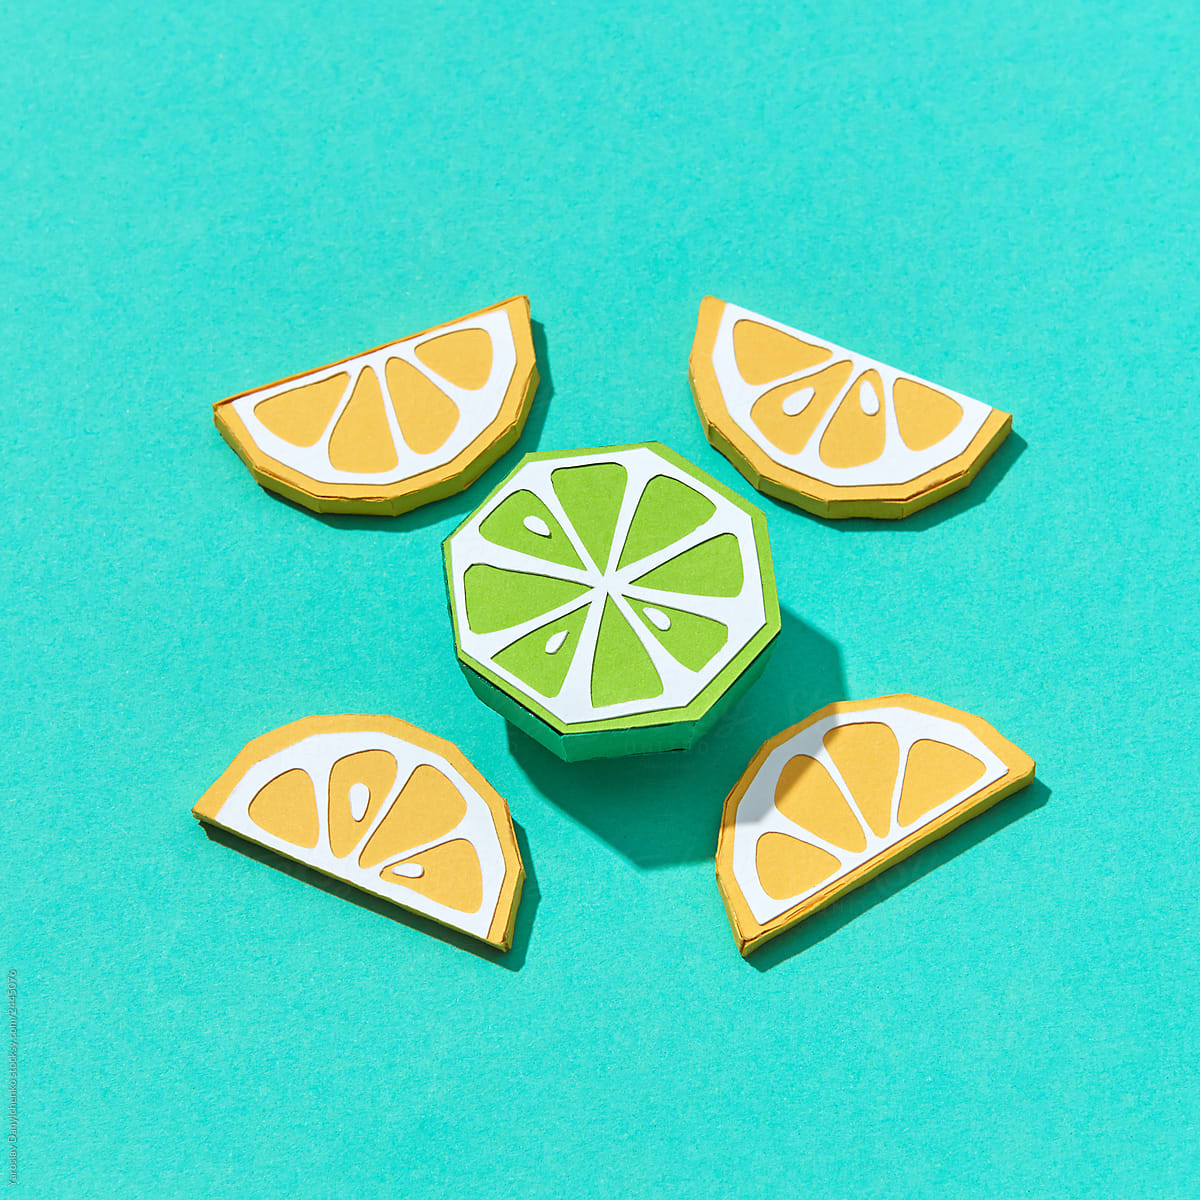 Paper handmade origami of lemon and lime slices on turquoise background.